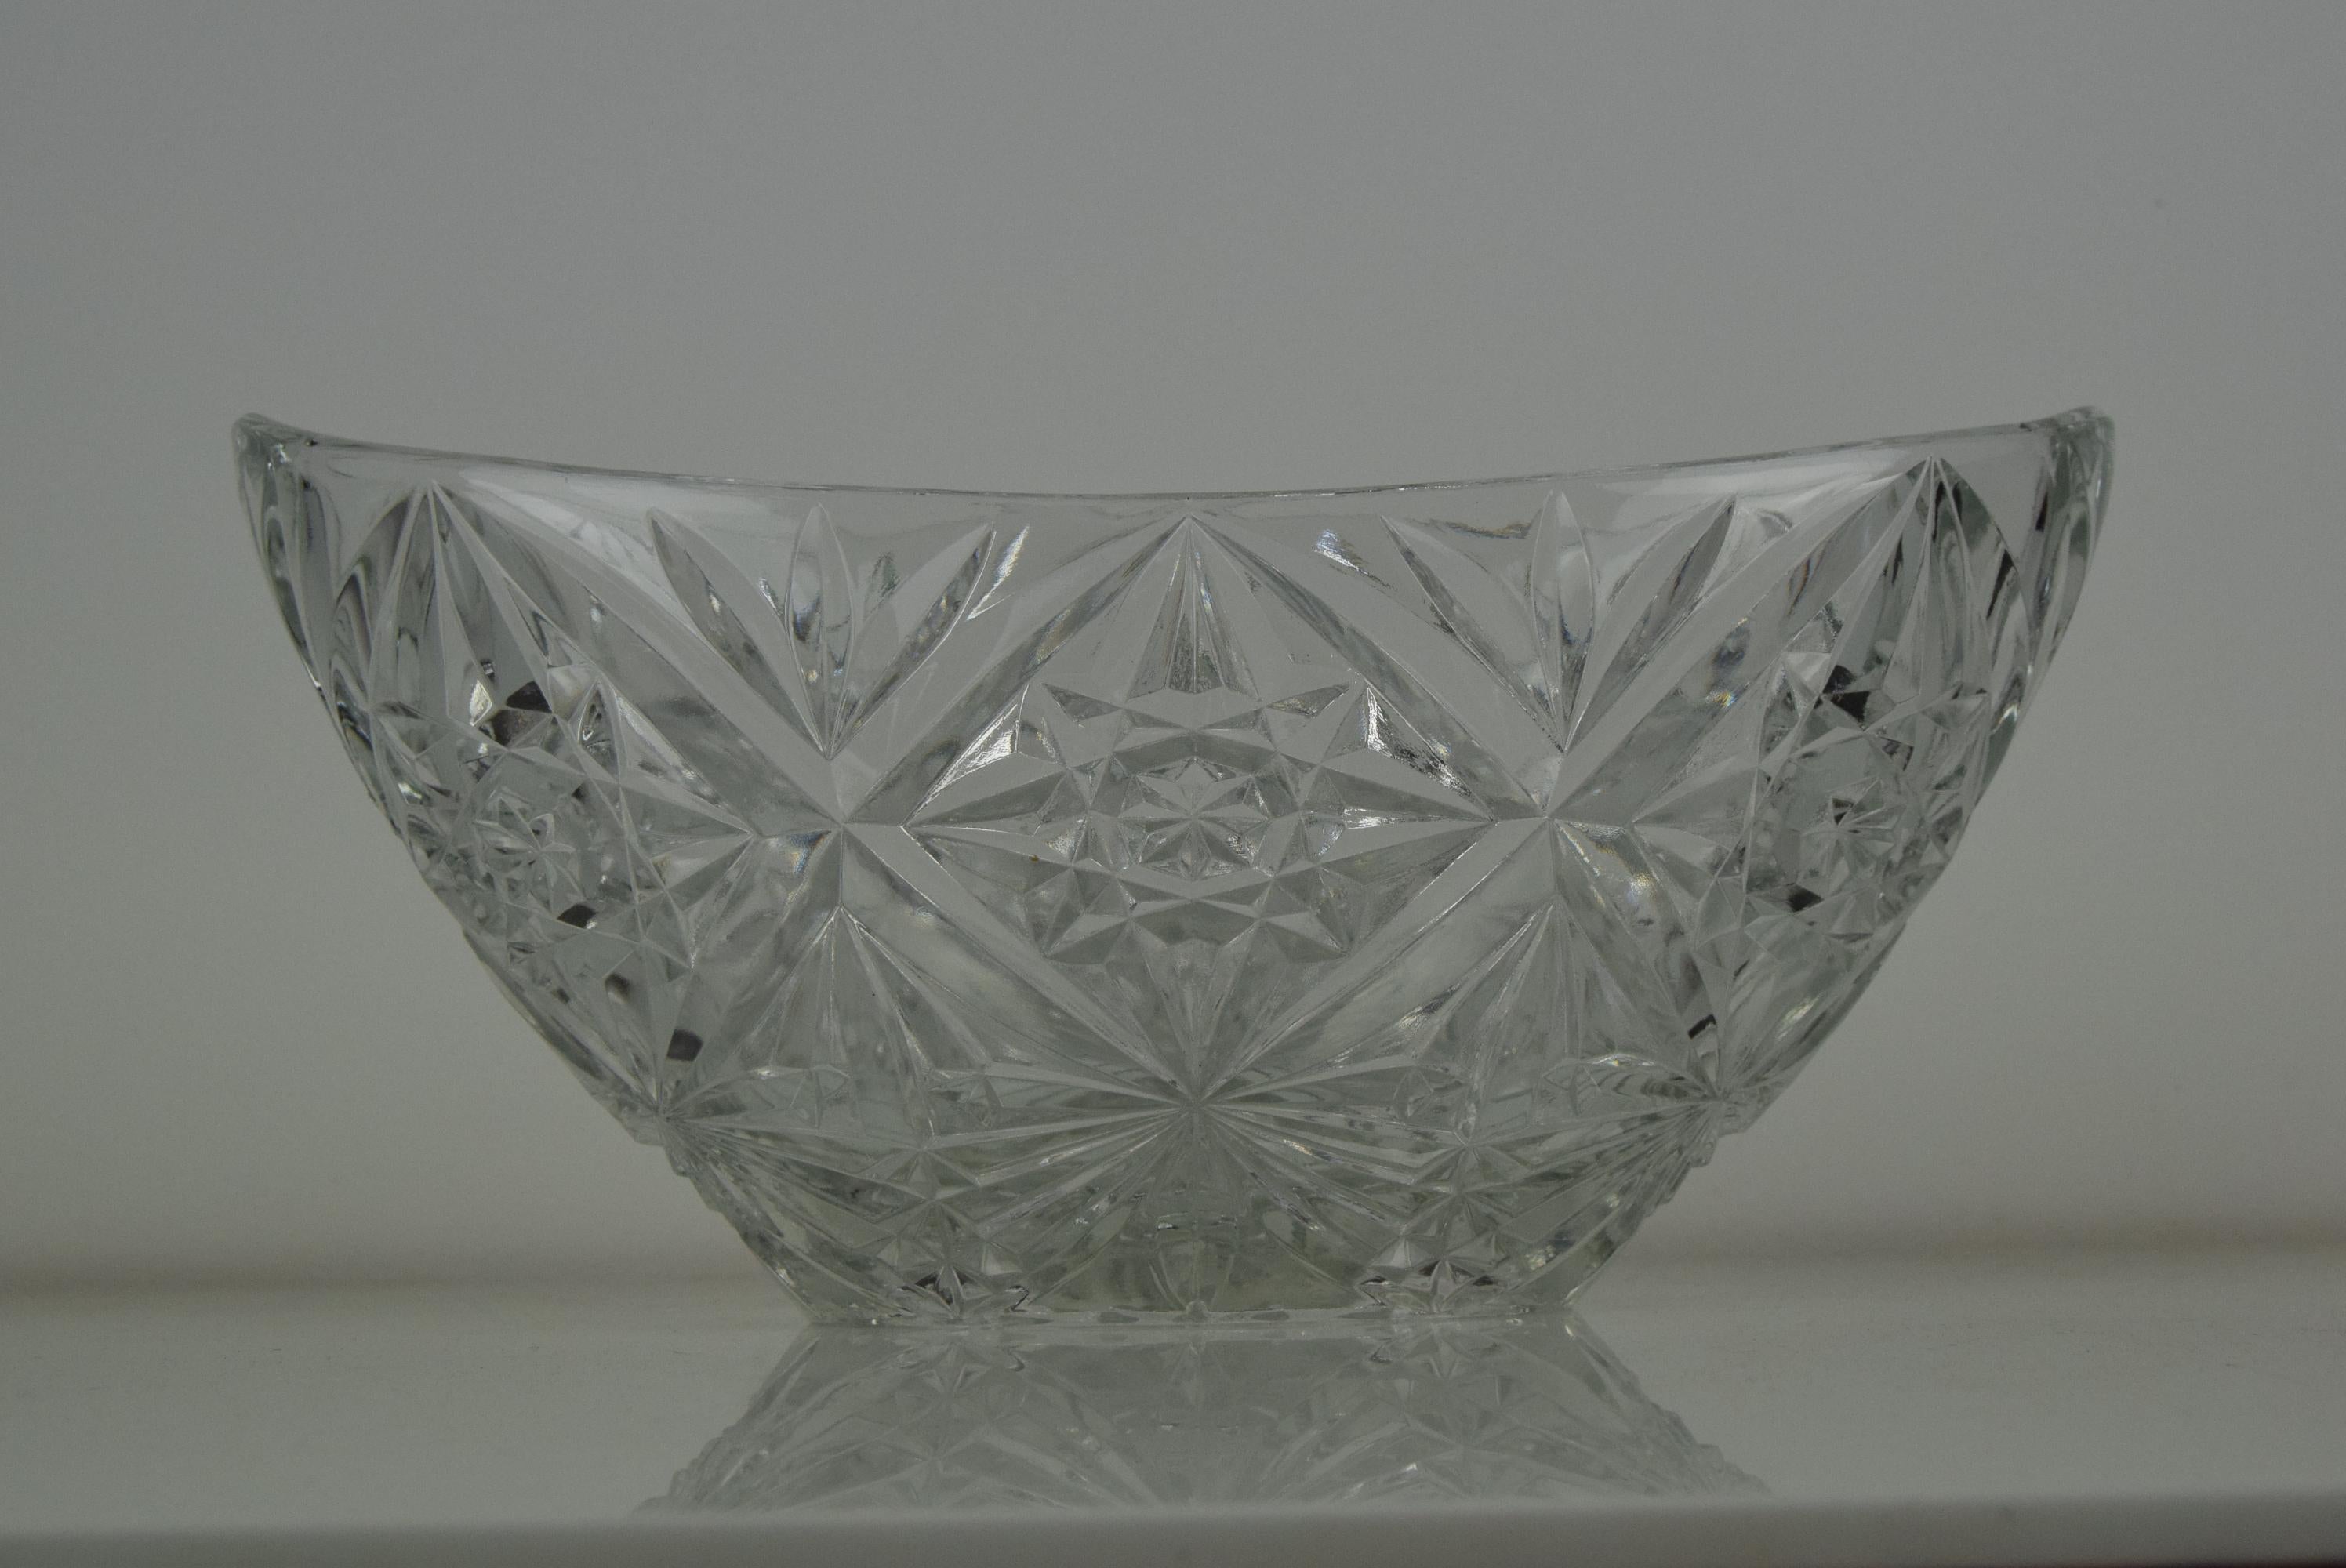 Made in Czechoslovakia
Made of Glass
Re-polished
Original condition.